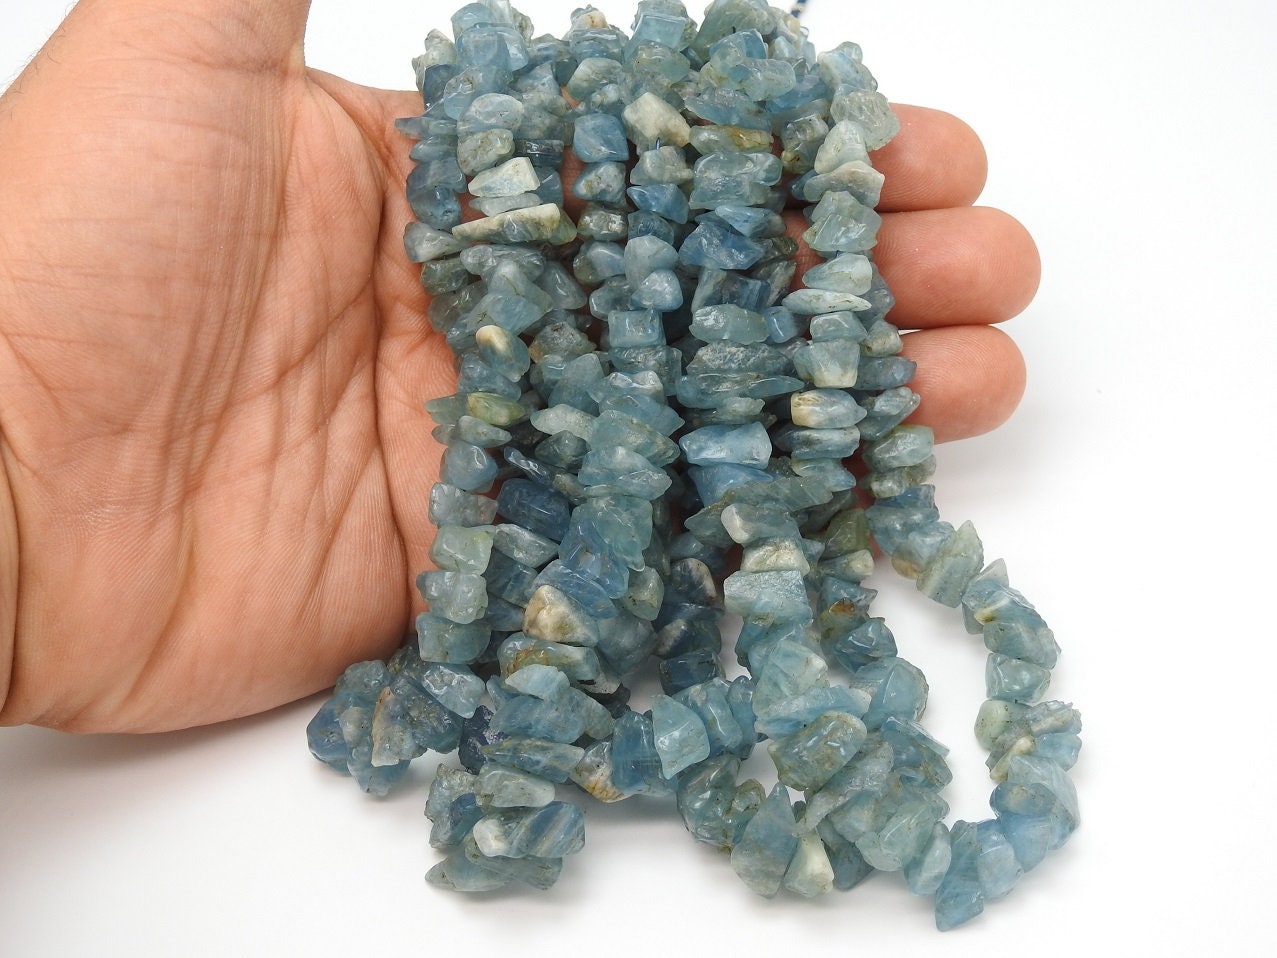 Aquamarine Polished Rough Bead,Uncut,Chip,Anklets,16Inch 18X12To8X5MM Approx,Wholesaler,Supplies,New Arrival,100%Natural PME-RB1 | Save 33% - Rajasthan Living 13